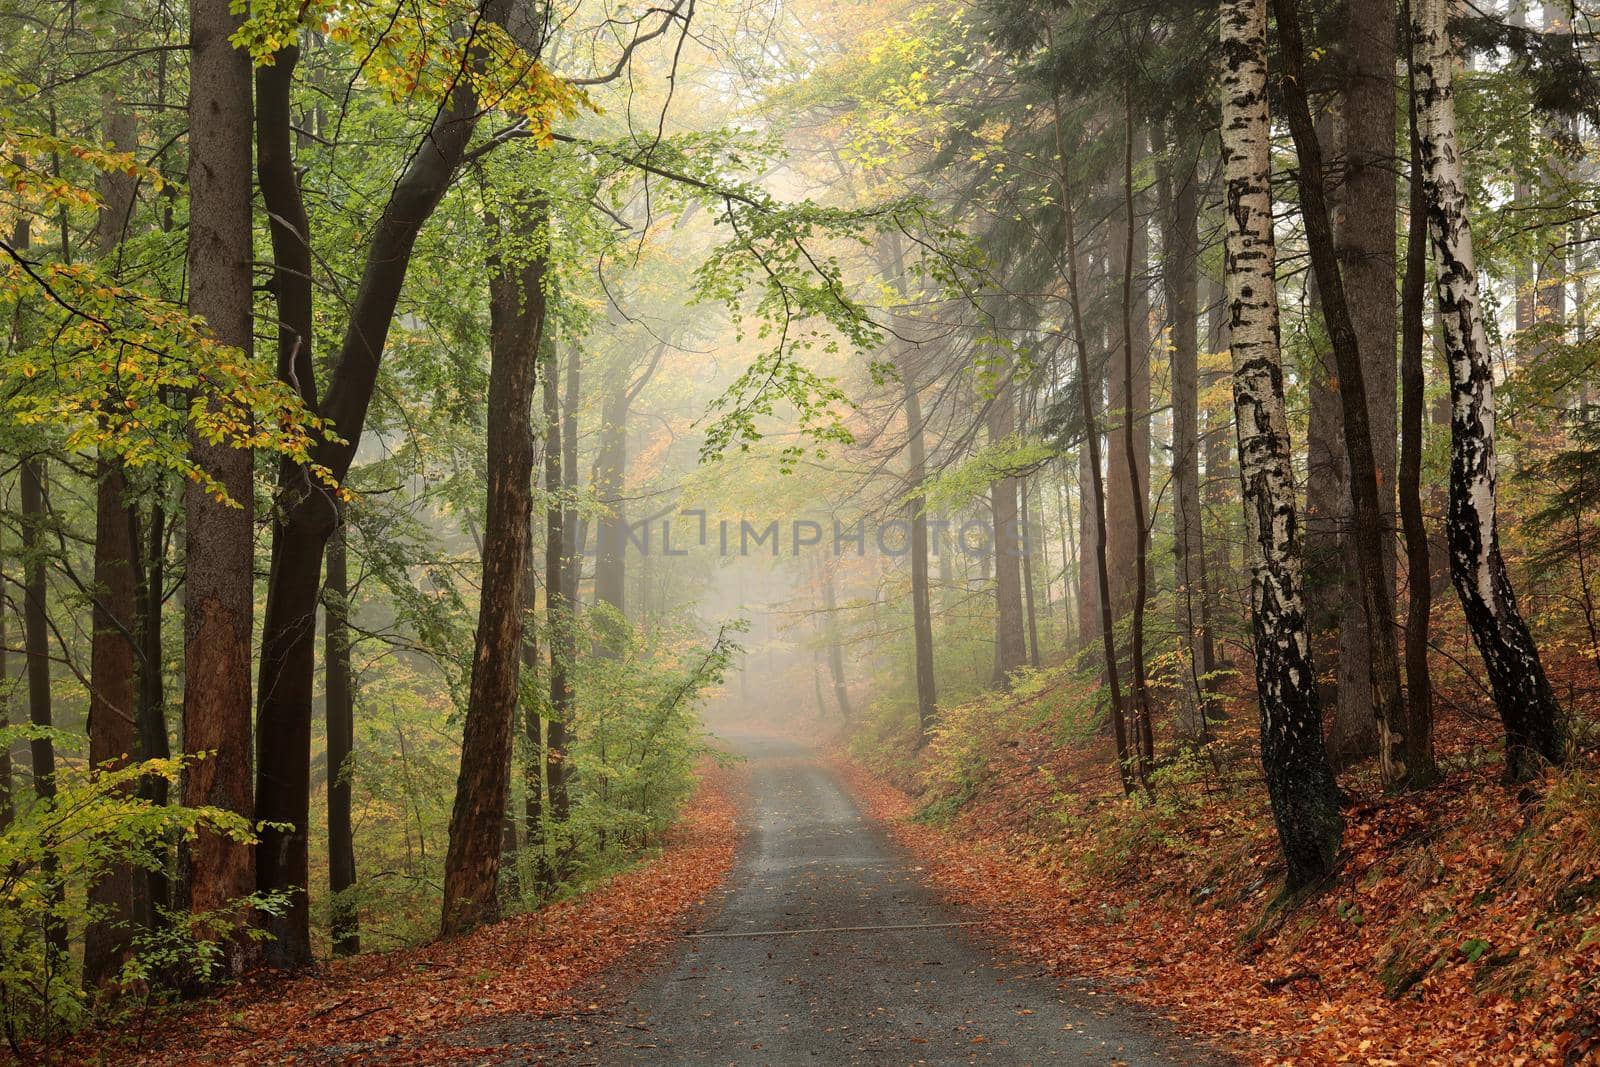 A trail among beech trees through an autumn forest in a misty rainy weather.